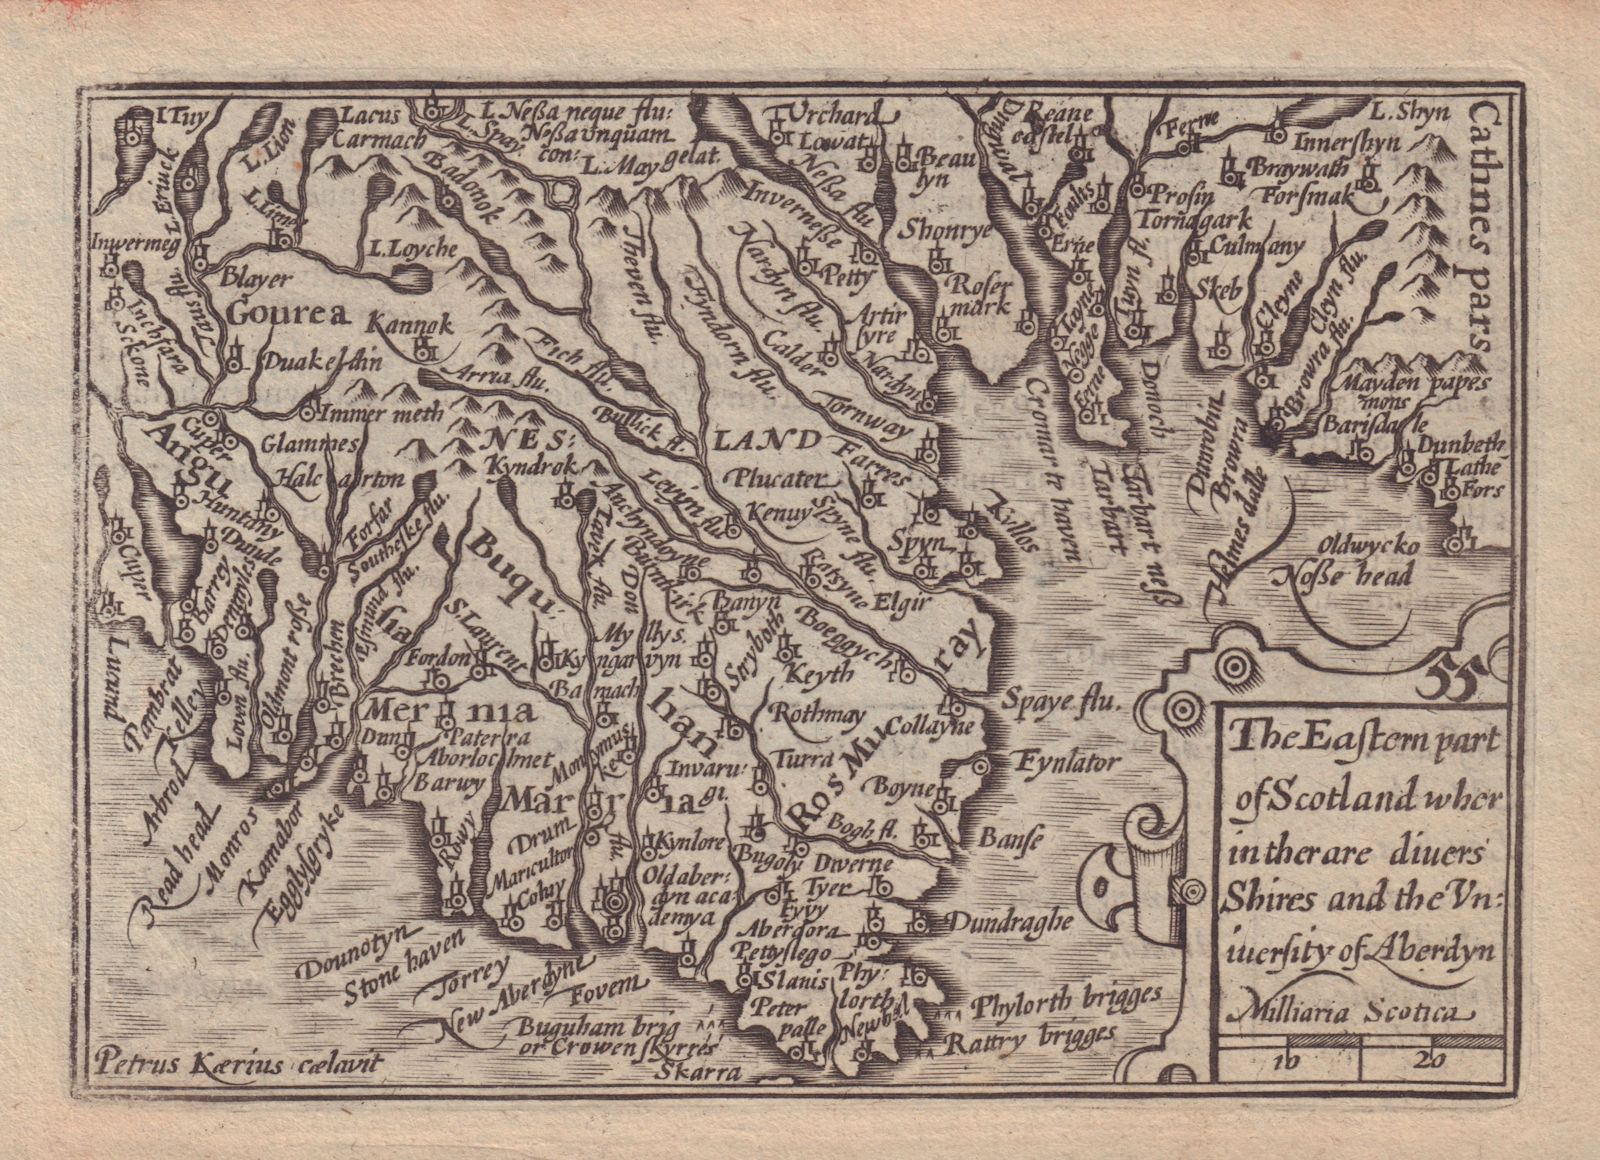 Associate Product The [North] Eastern part of Scotland… by Keere. "Speed miniature" 1632 old map